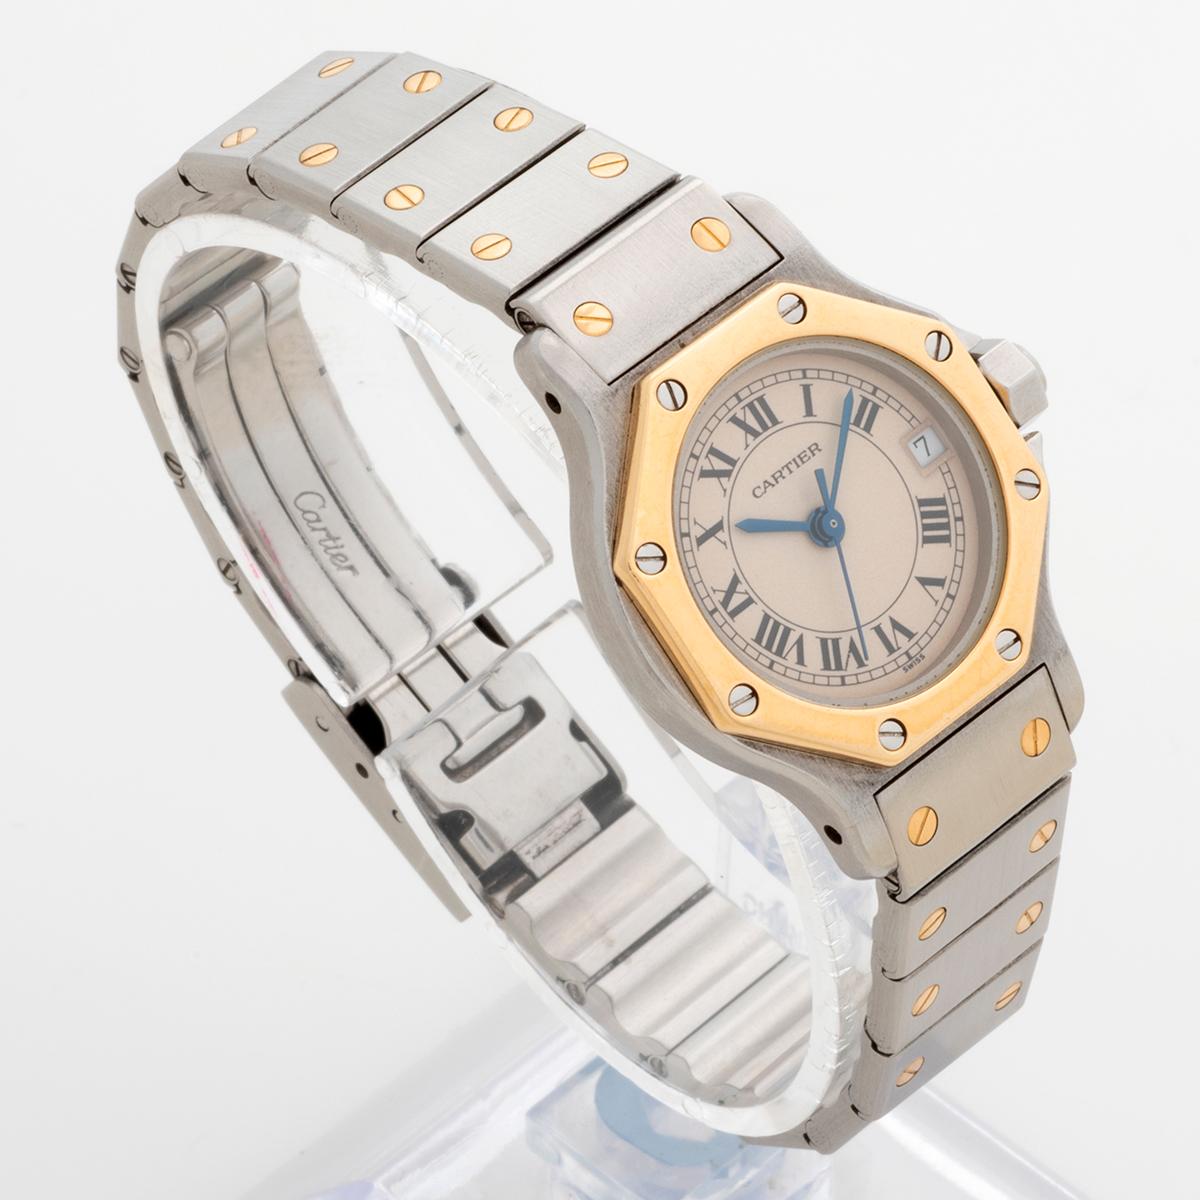 Our Attractive Cartier Santos Octagone reference 187903 features the small size case with quartz movement and date function. The case (26mm x 31mm) and bracelet are of stainless steel and 18k yellow gold. Presented in outstanding condition, with